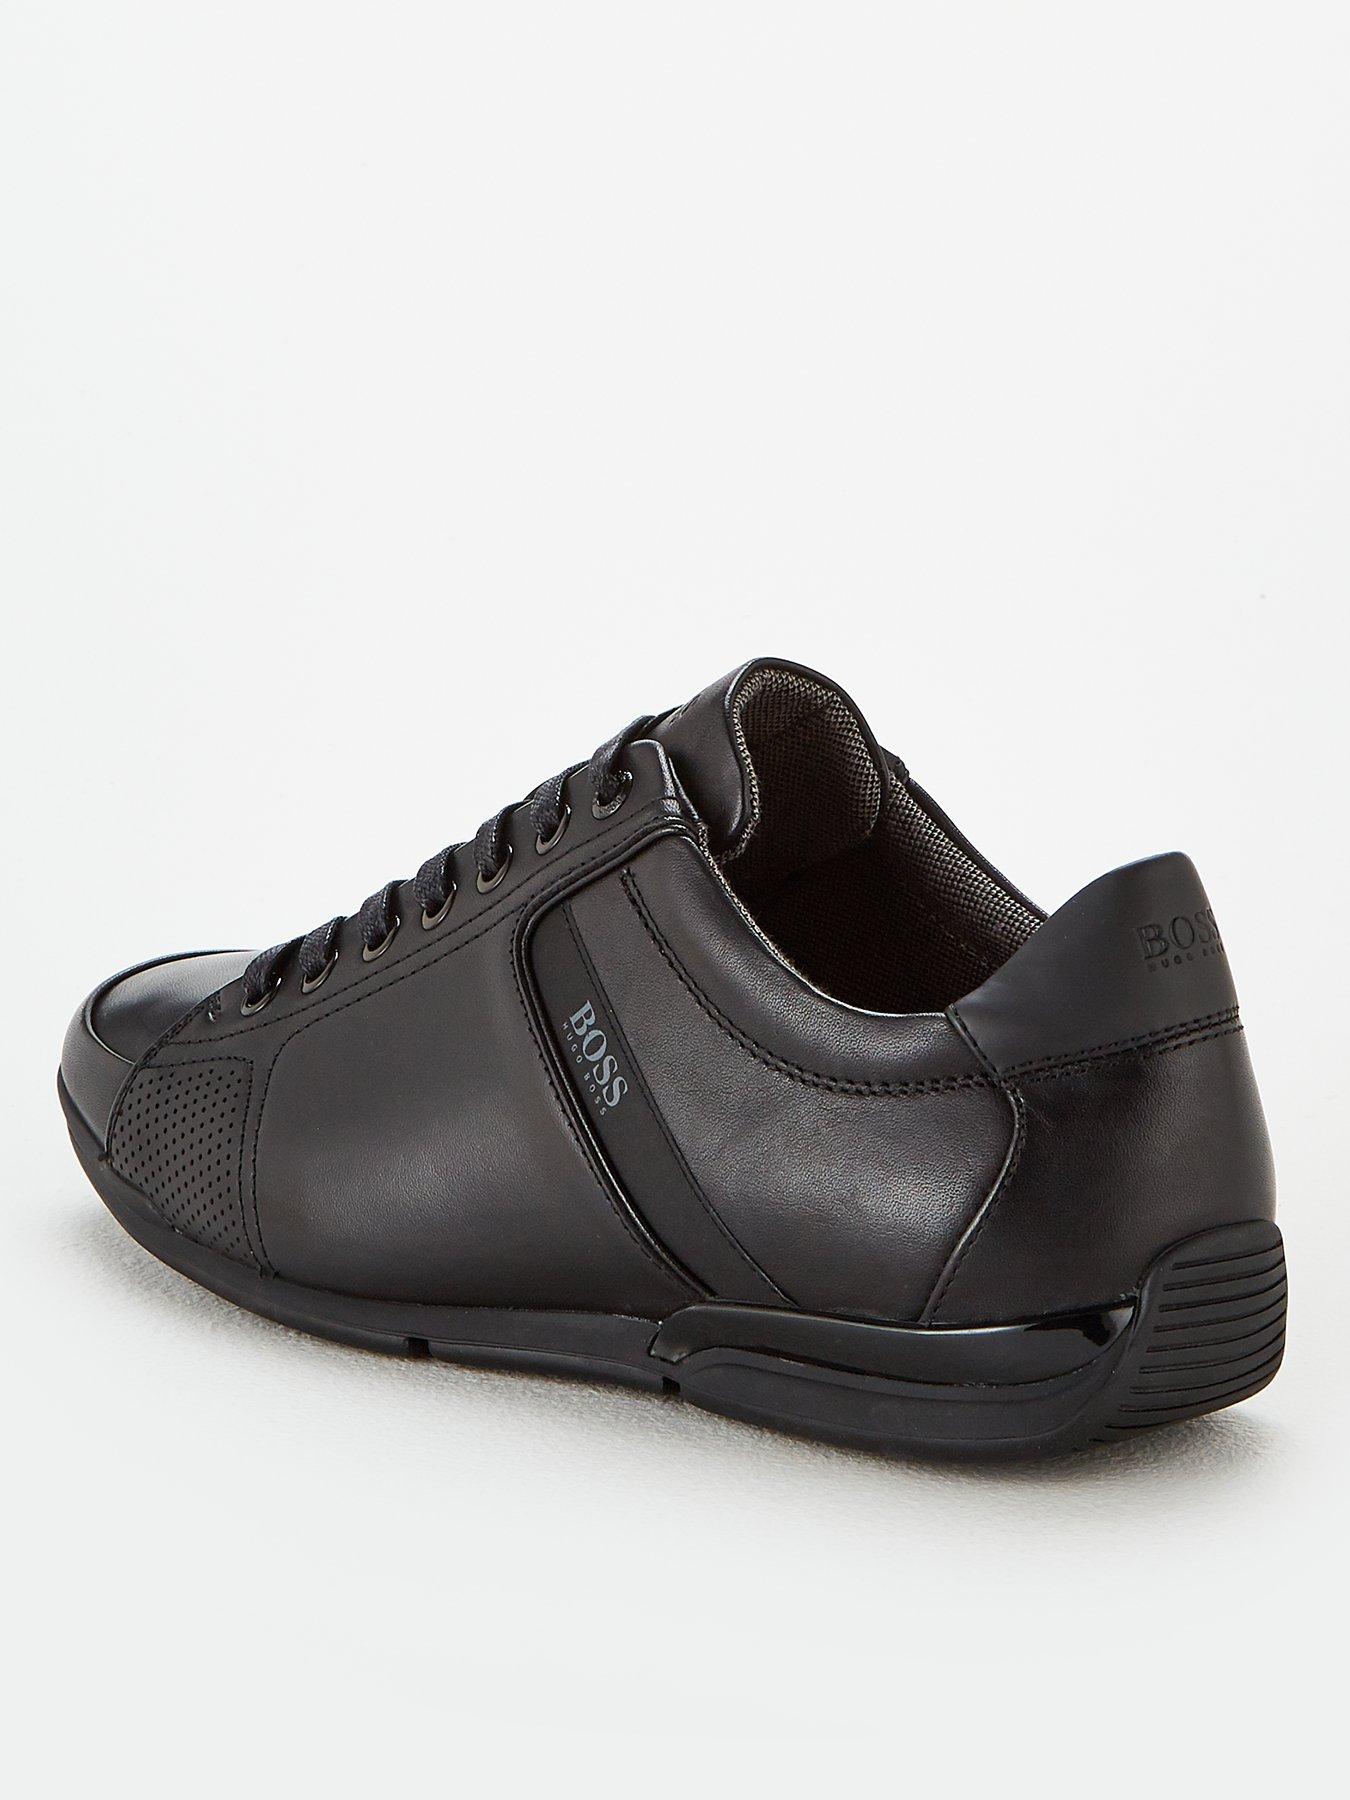 boss athleisure saturn leather trainers